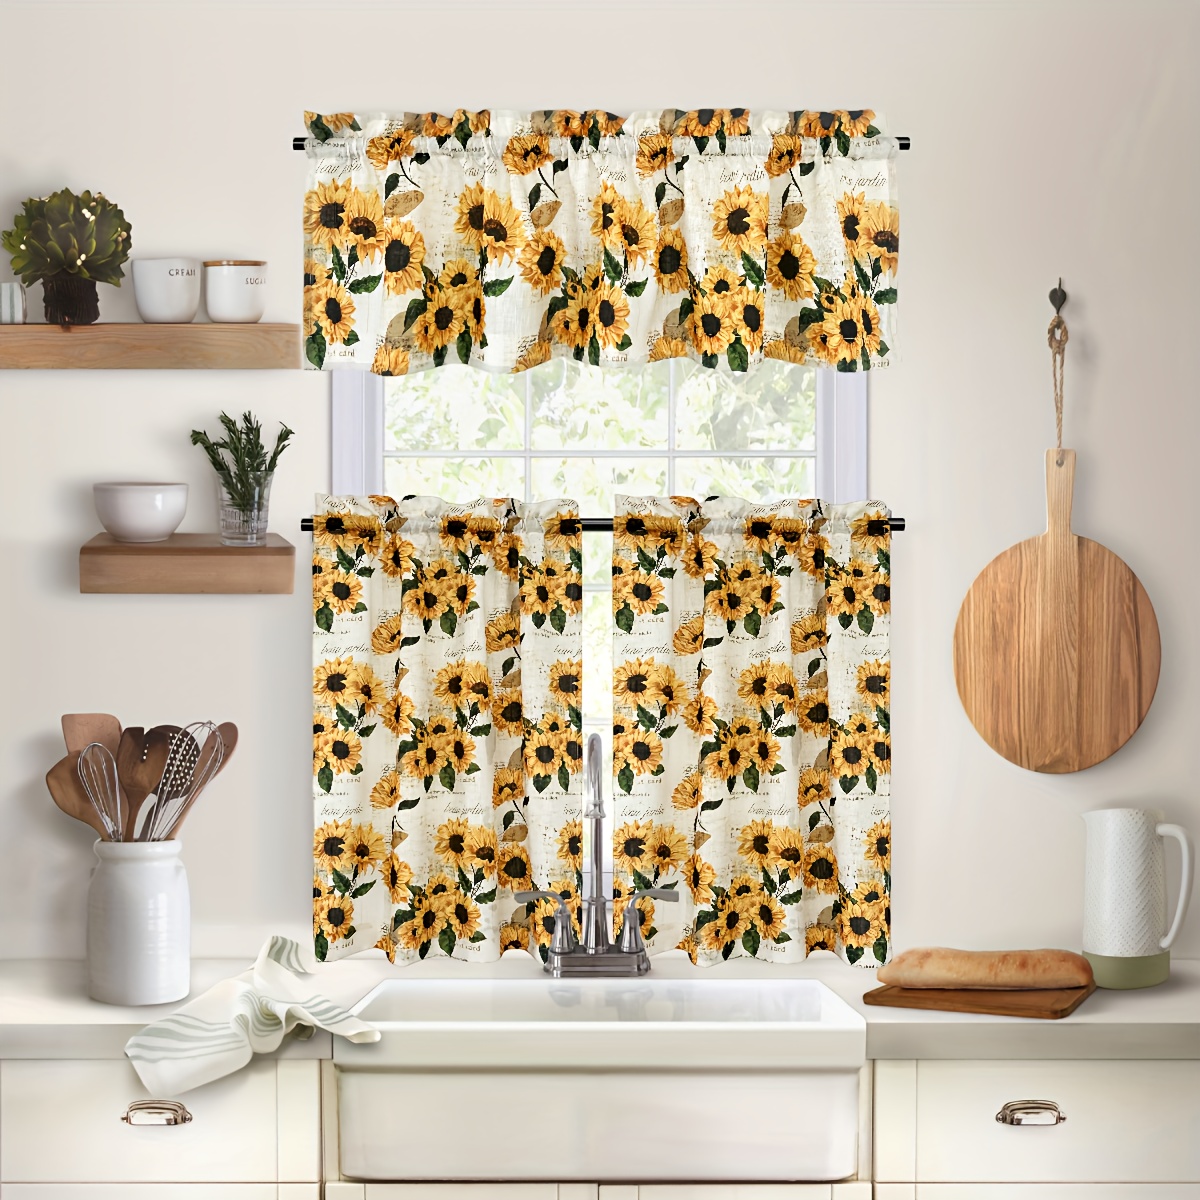 

3pcs/set Curtains 1pc Valance And 2pcs Cafe Curtain Sunflower Printed Curtains, Rod Pocket Curtains For Bedroom, Office, Kitchen, Living Room, Study Room Home Decor